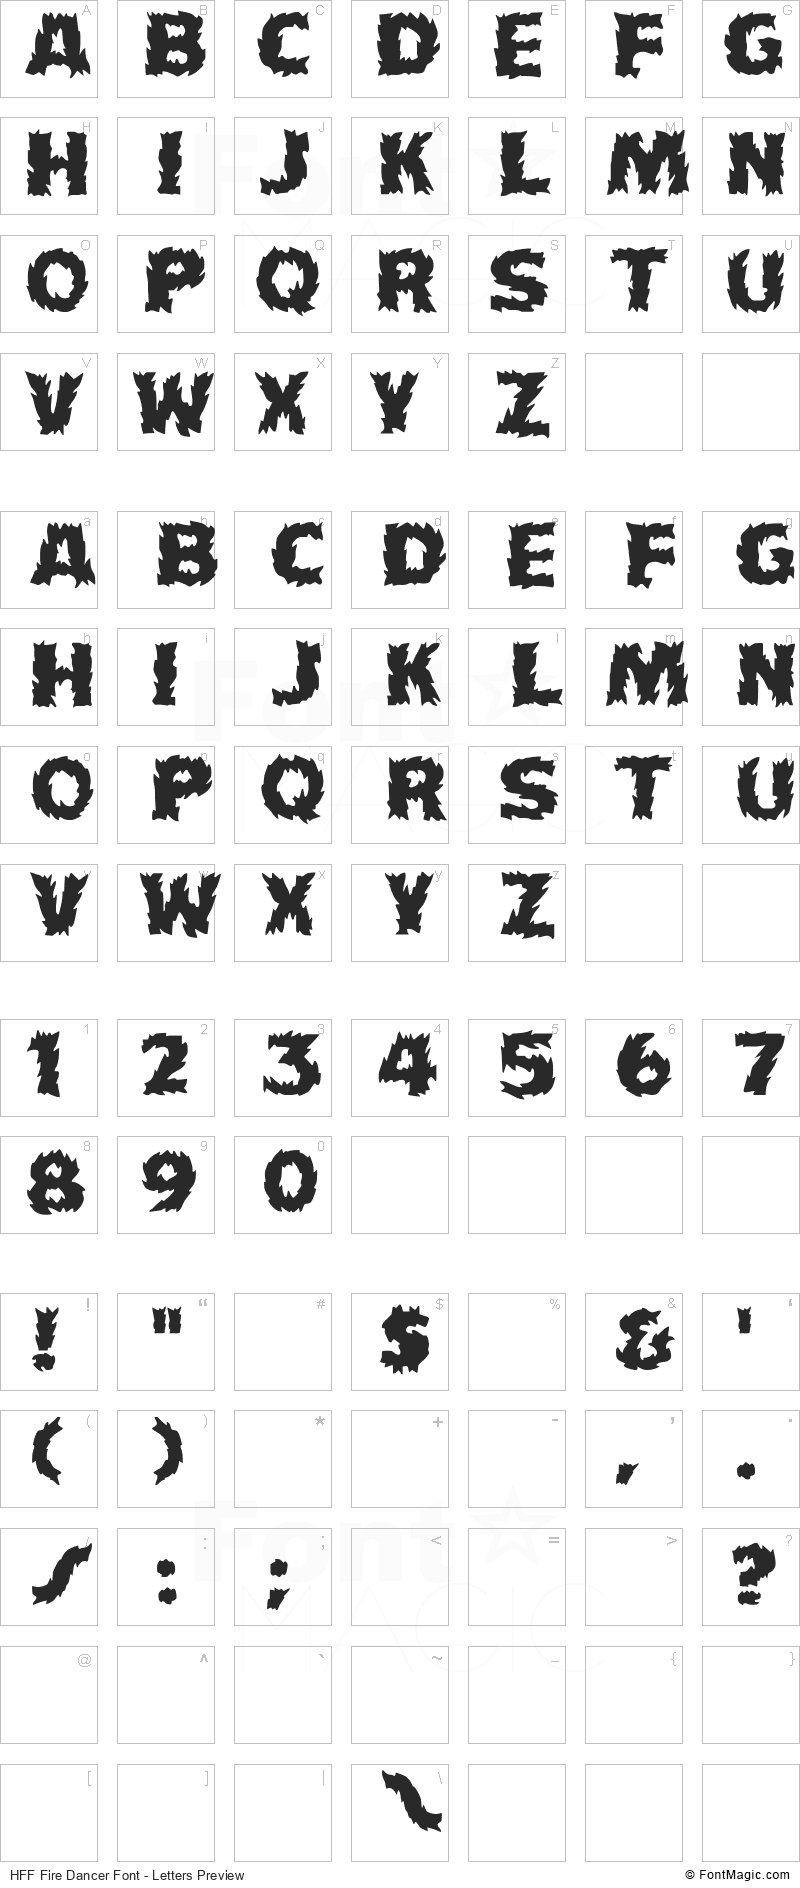 HFF Fire Dancer Font - All Latters Preview Chart